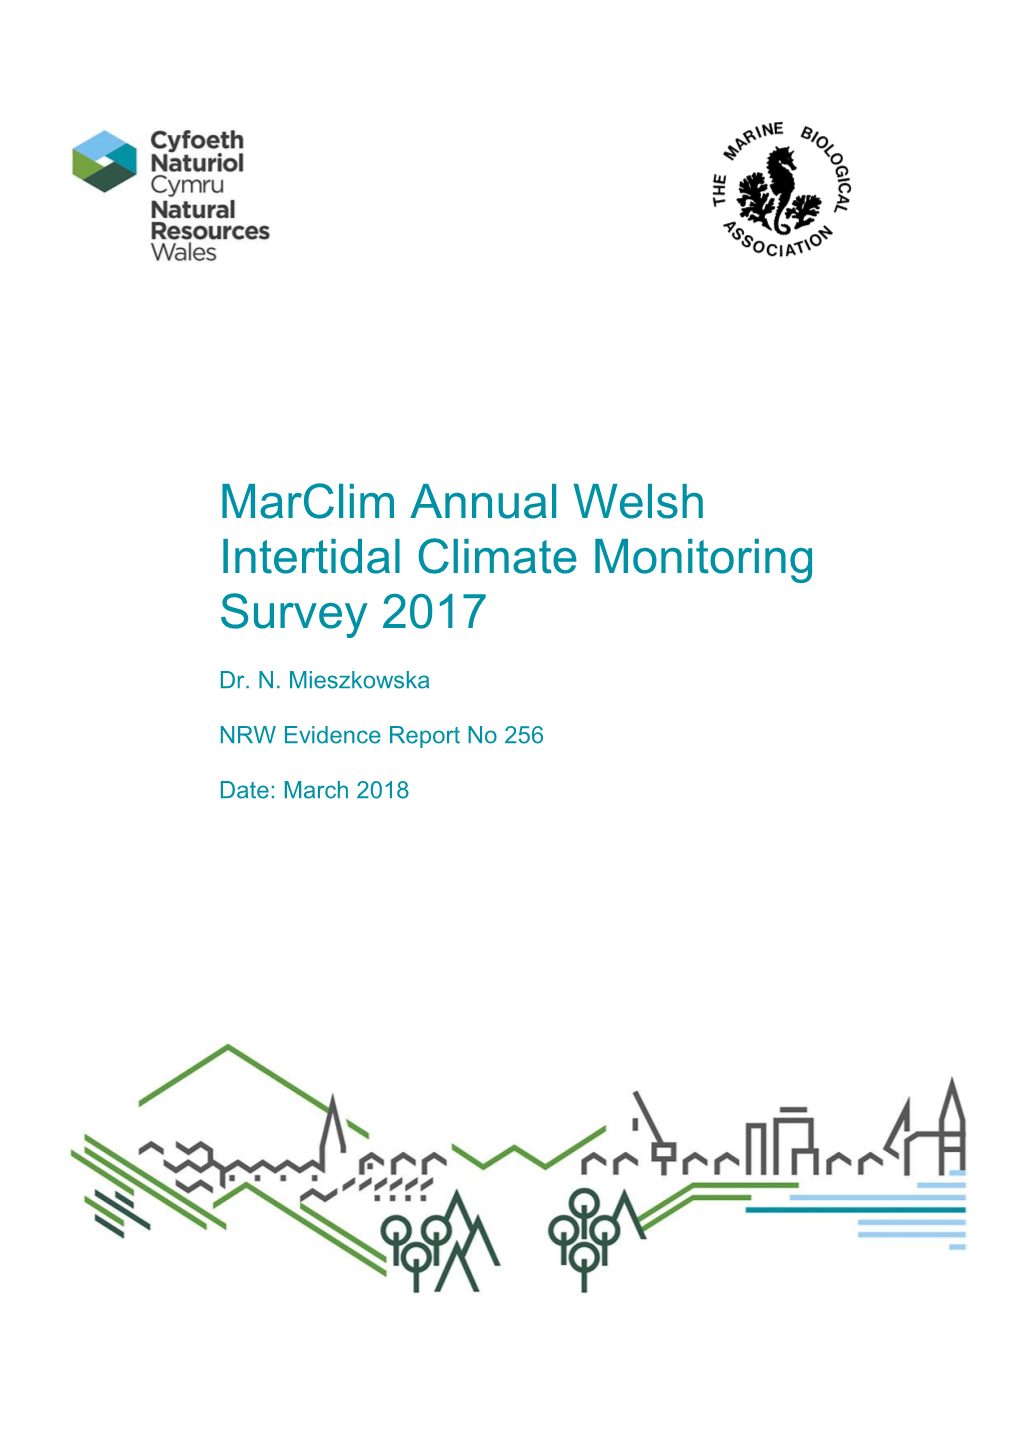 Marclim Annual Welsh Intertidal Climate Monitoring Survey 2017